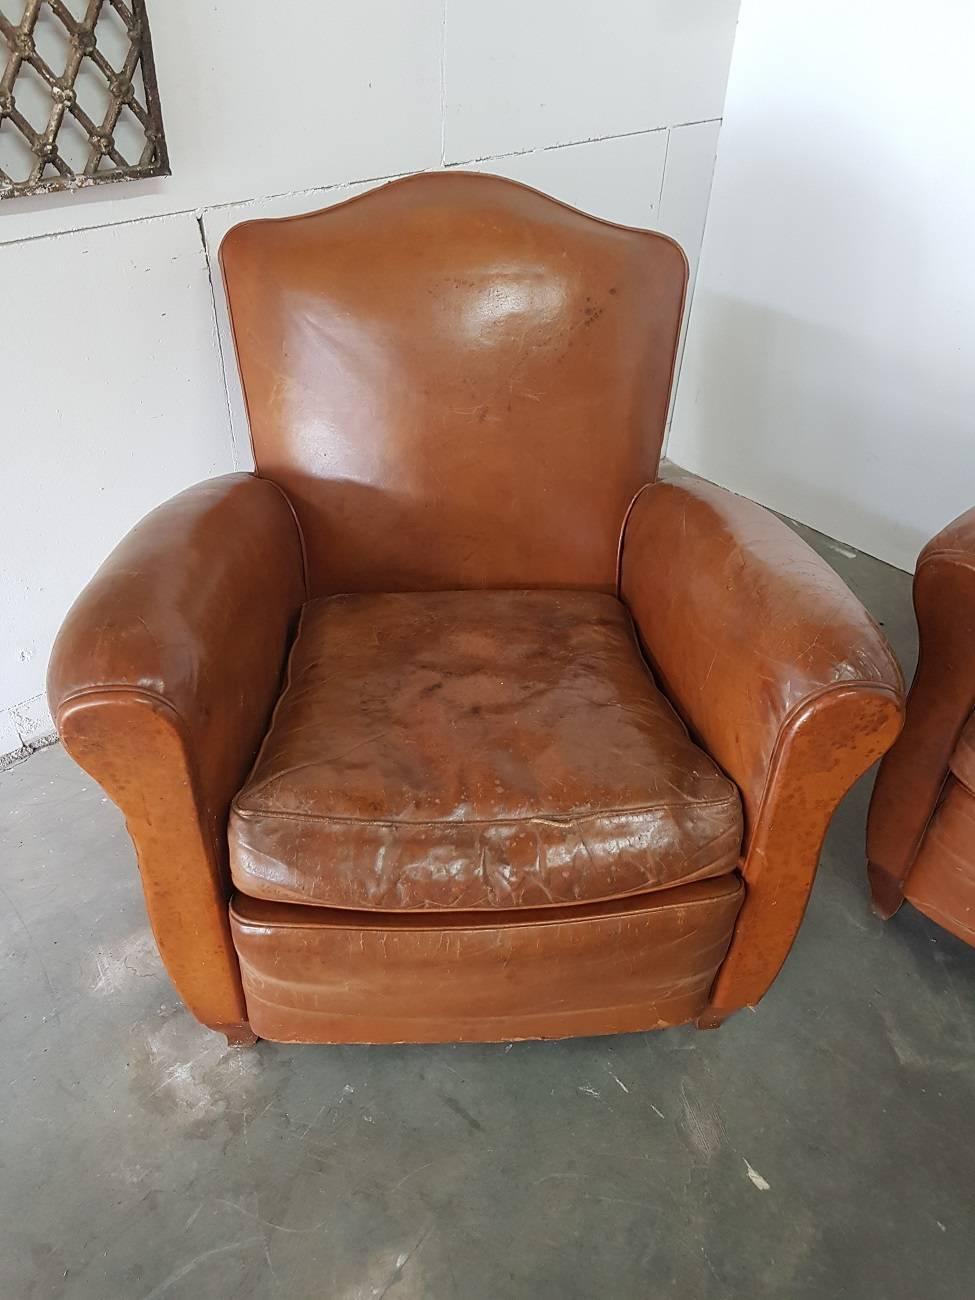 Vintage French leather sofa set from the 1950s consisting of two armchairs and a matching two person sofa. Everything is in a good but used condition.

The measurements are,
Chairs depth 88 cm/ 34.6 inch.
 Width 83 cm/ 32.6 inch.
 Height 82 cm/